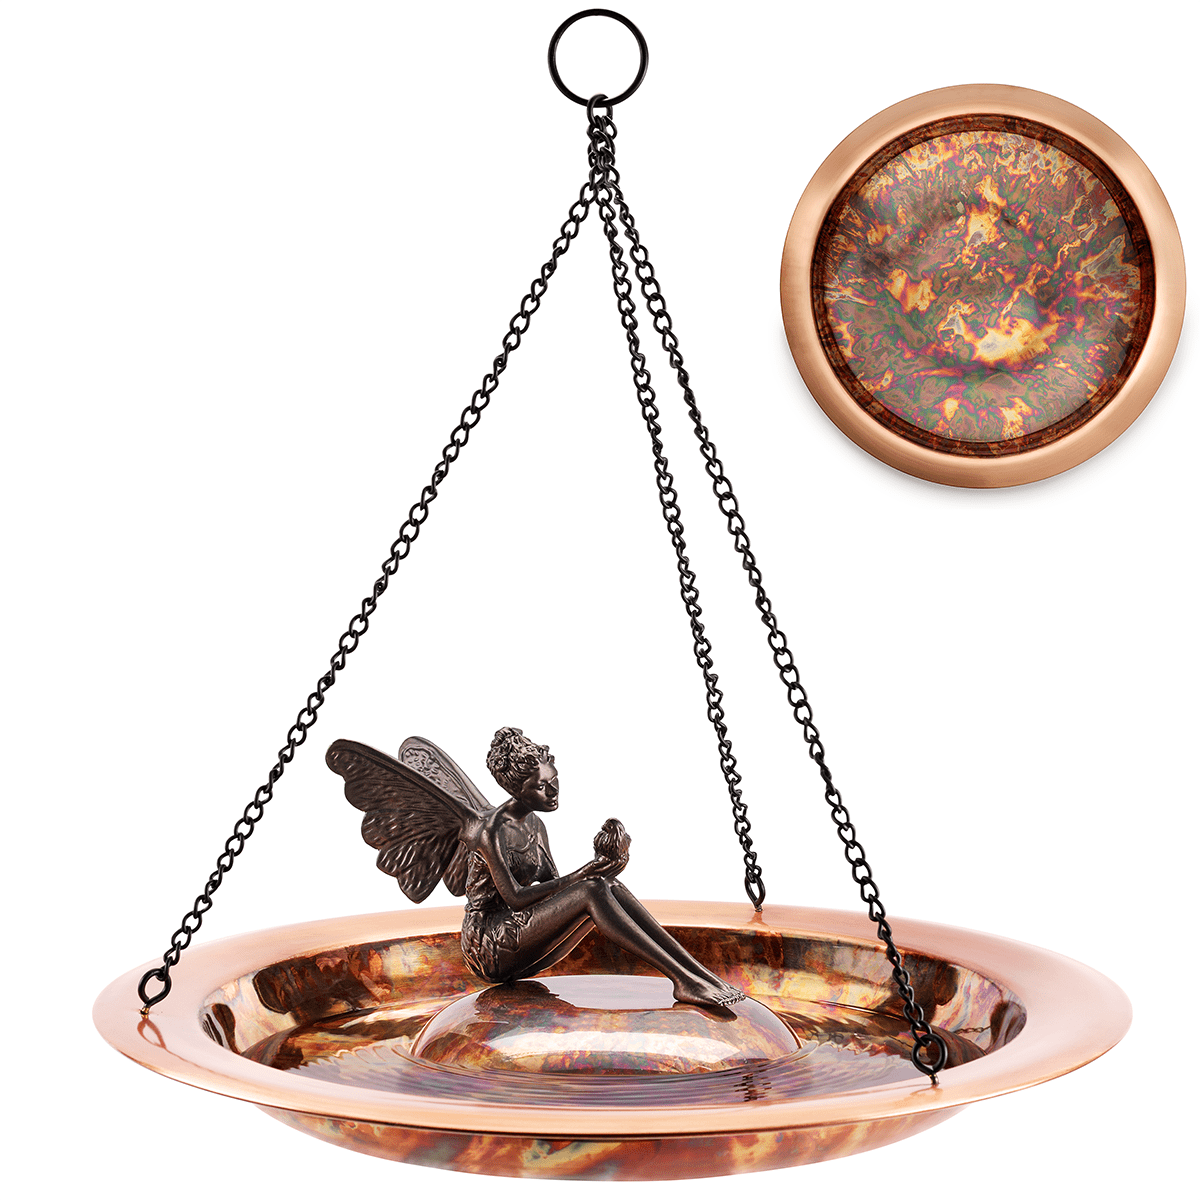 18" Hanging Fired Copper Bird Bath with Fairy - Good Directions